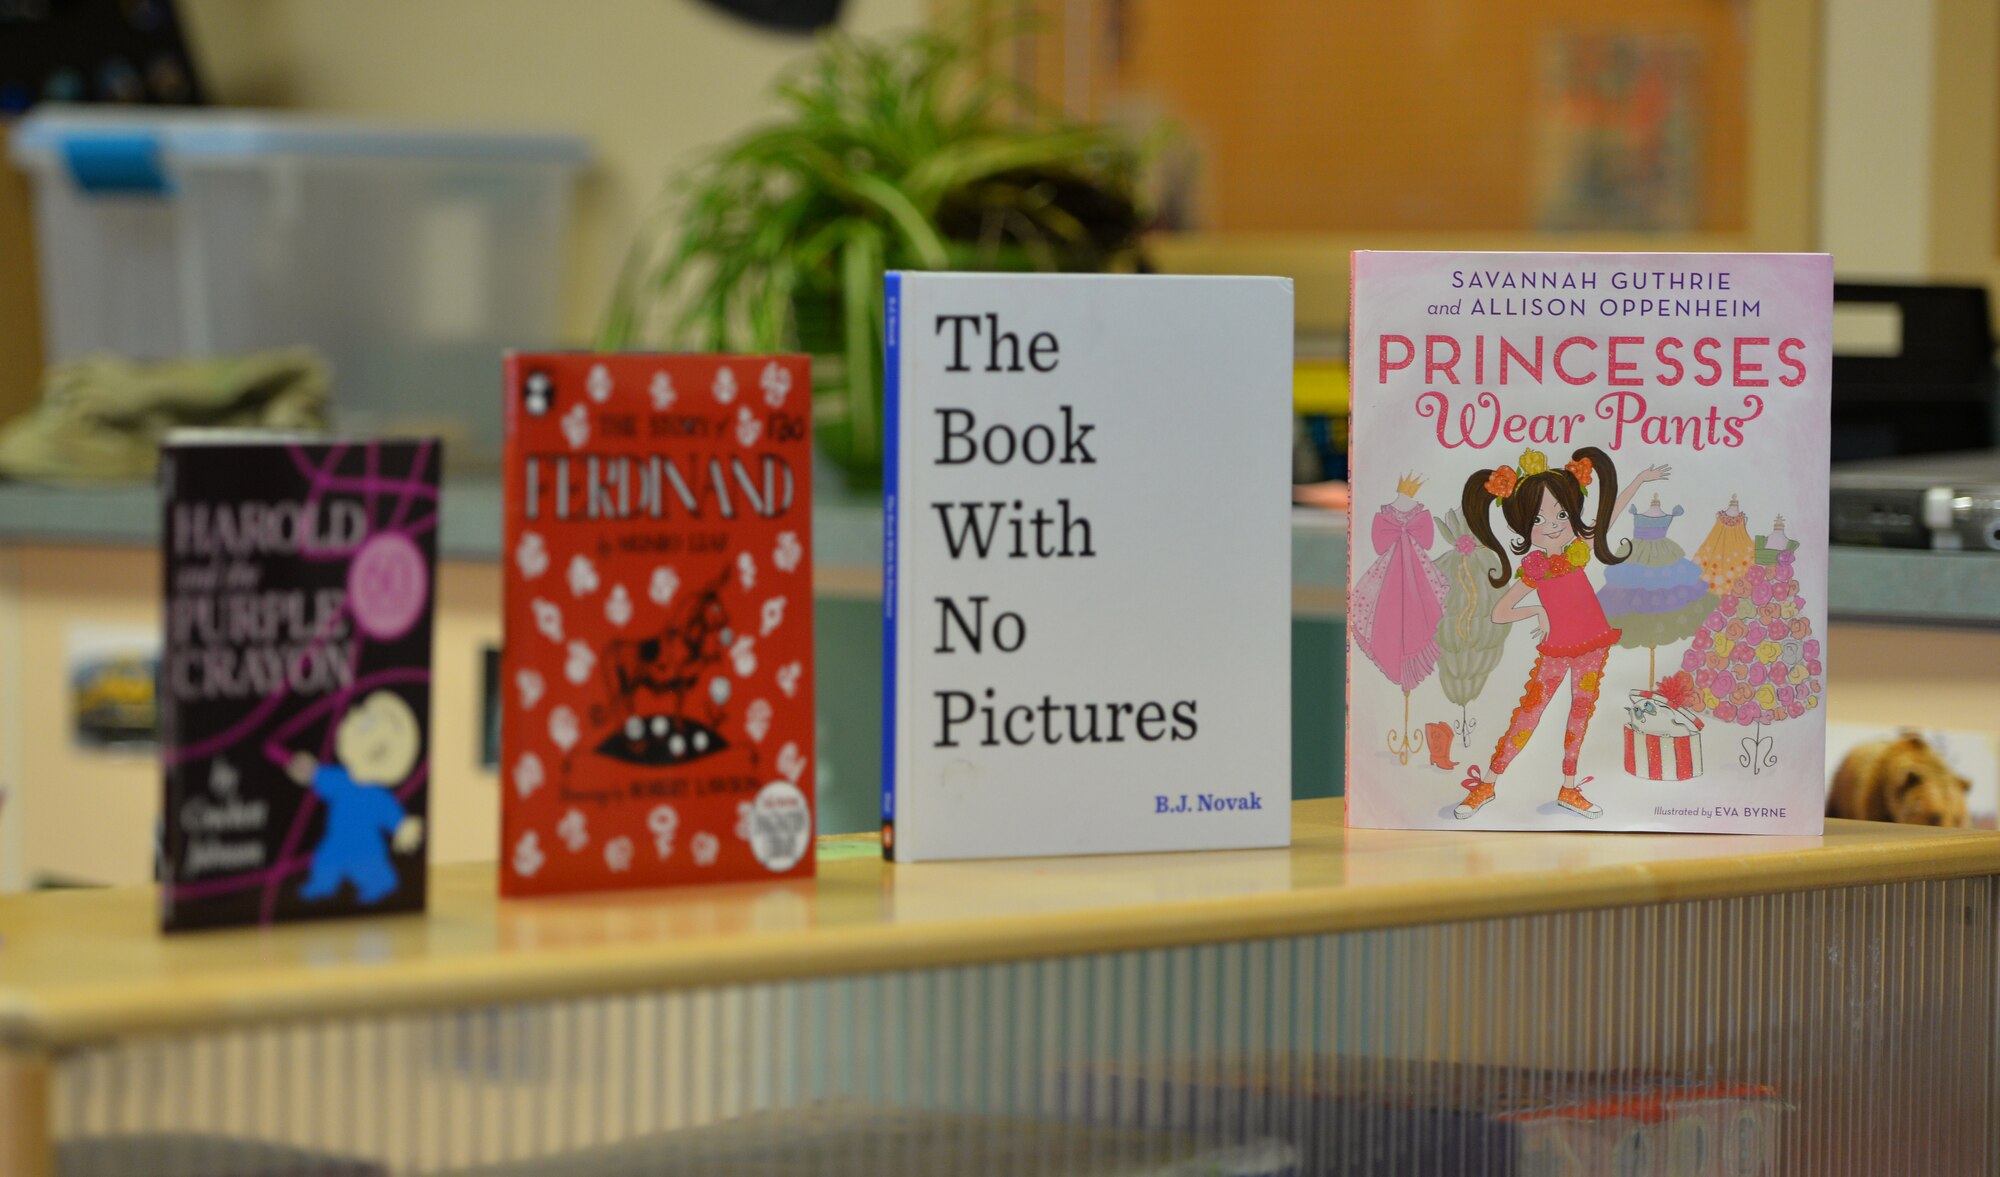 The Denali Child Development Center displays a selection of books for its guests to choose from during their visit, Joint Base Elmendorf-Richardson, Alaska, April 8, 2019. In honor of Month of the Military Child, U.S. Air Force Col. Patricia Csànk, JBER and 673d Air Base Wing commander, visited the CDC to read to some of the children. Out of the selection of four books, the kids elected to read “The Book With No Pictures,” by B.J. Novak, knowing all too well what this piece of literature would have Csànk reading aloud.